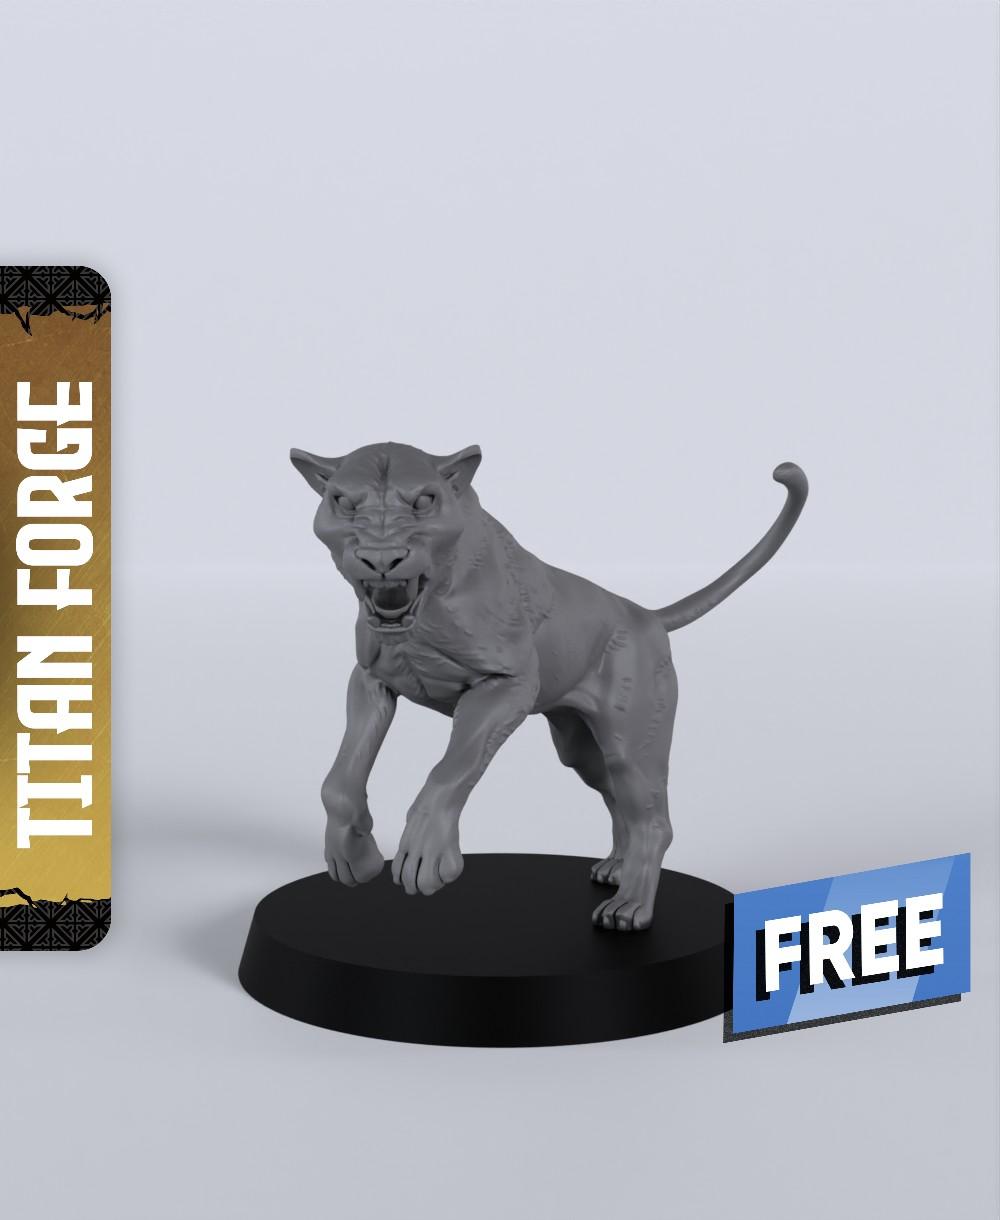 Panther - With Free Dragon Warhammer - 5e DnD Inspired for RPG and Wargamers 3d model